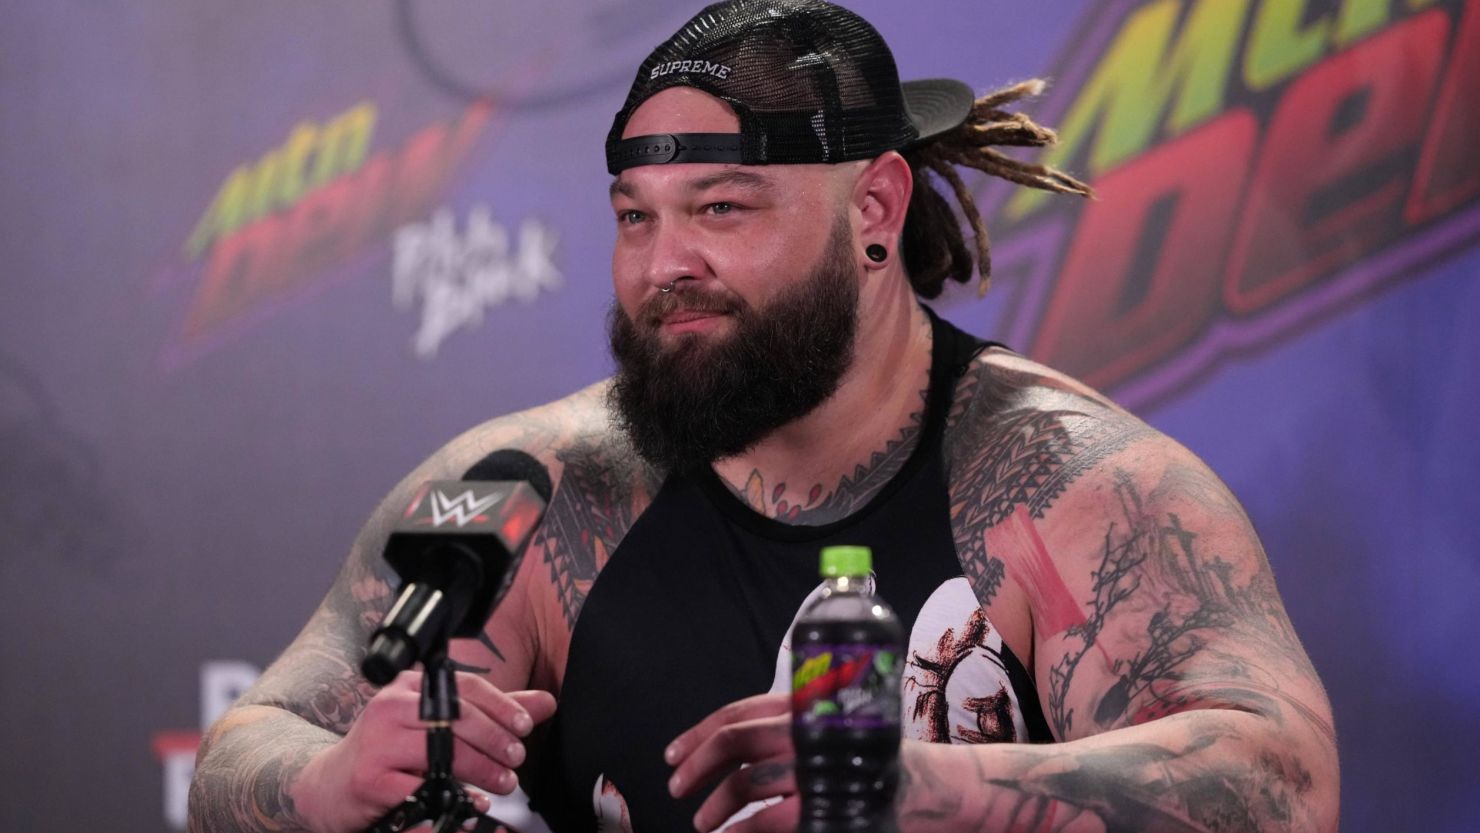 Bray Wyatt speaks during a press conference after the WWE Royal Rumble at the Alamodome in San Antonio on January 28, 2023. 